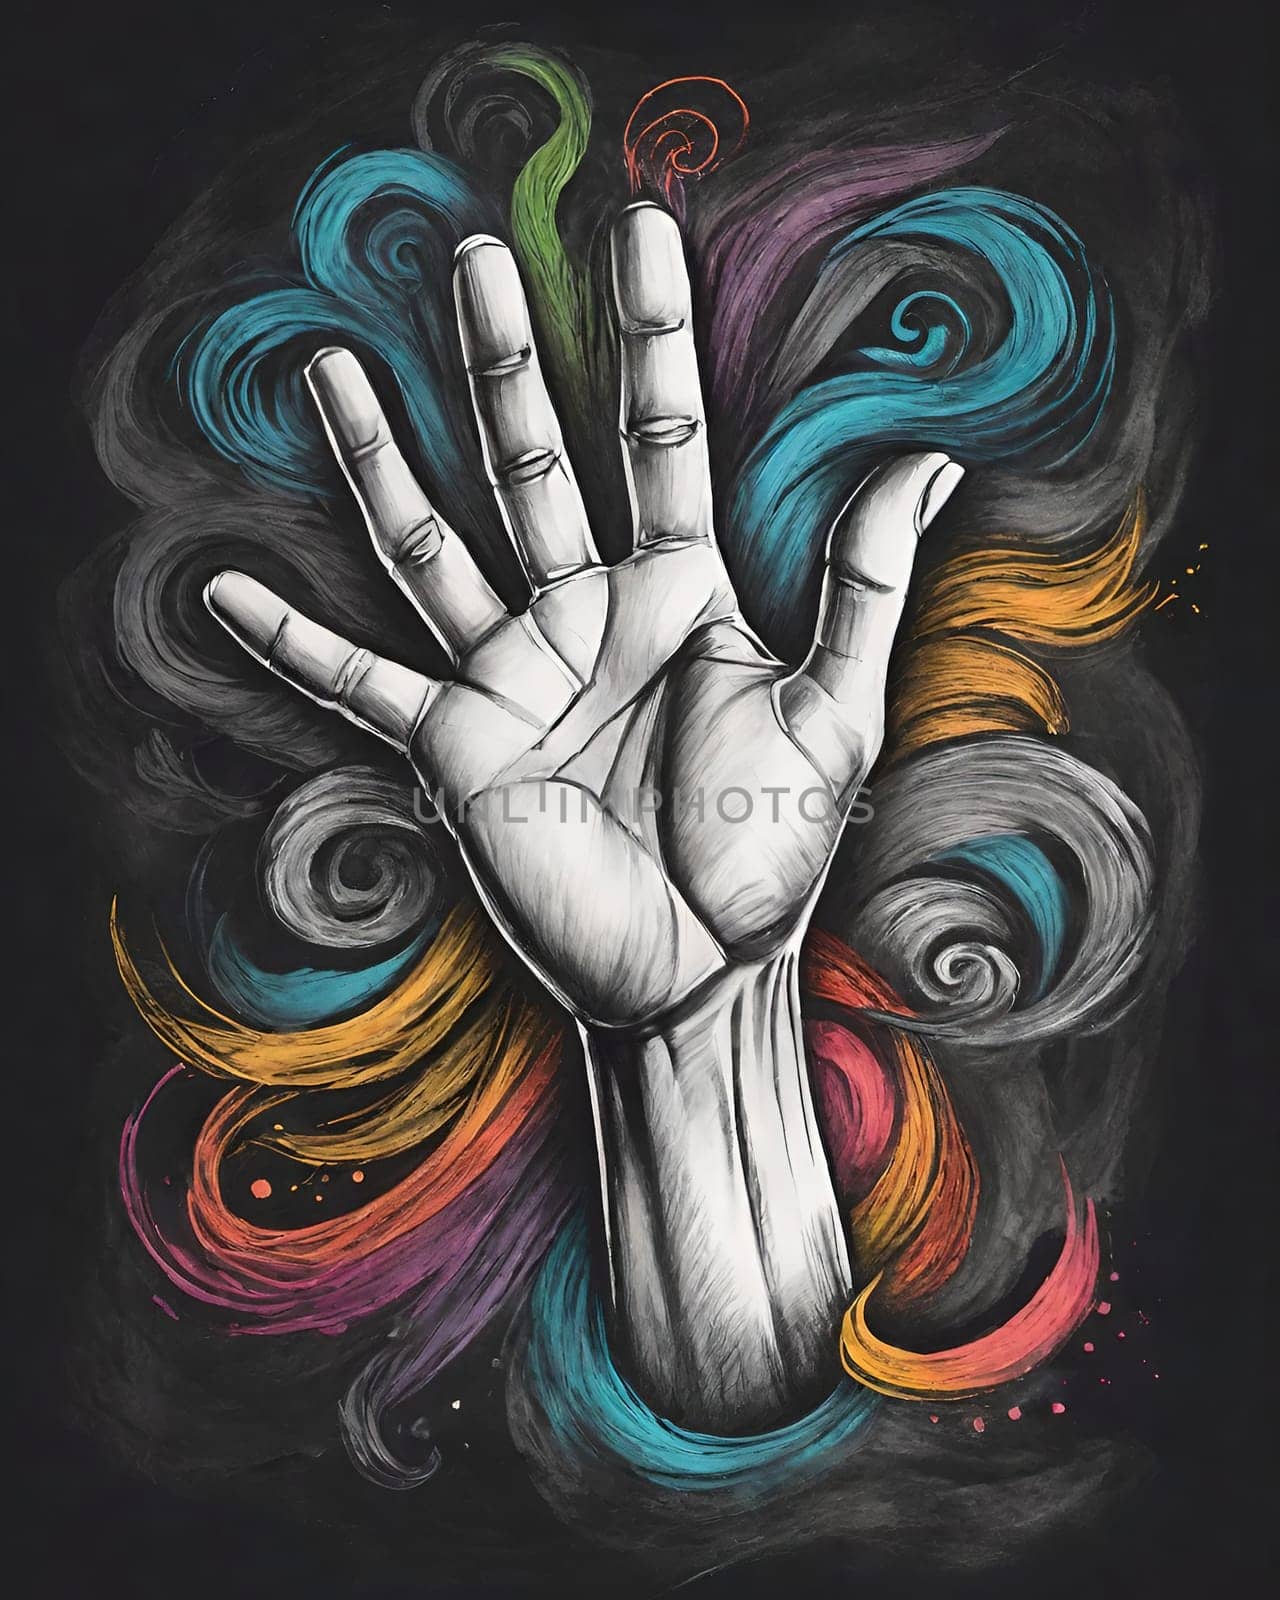 Hand drawn sketch style illustration of human hand on a colorful background.Hand of a man painted on a blackboard with colored stripes.Hand drawn sketch of human hand on colorful background. Vector illustration.